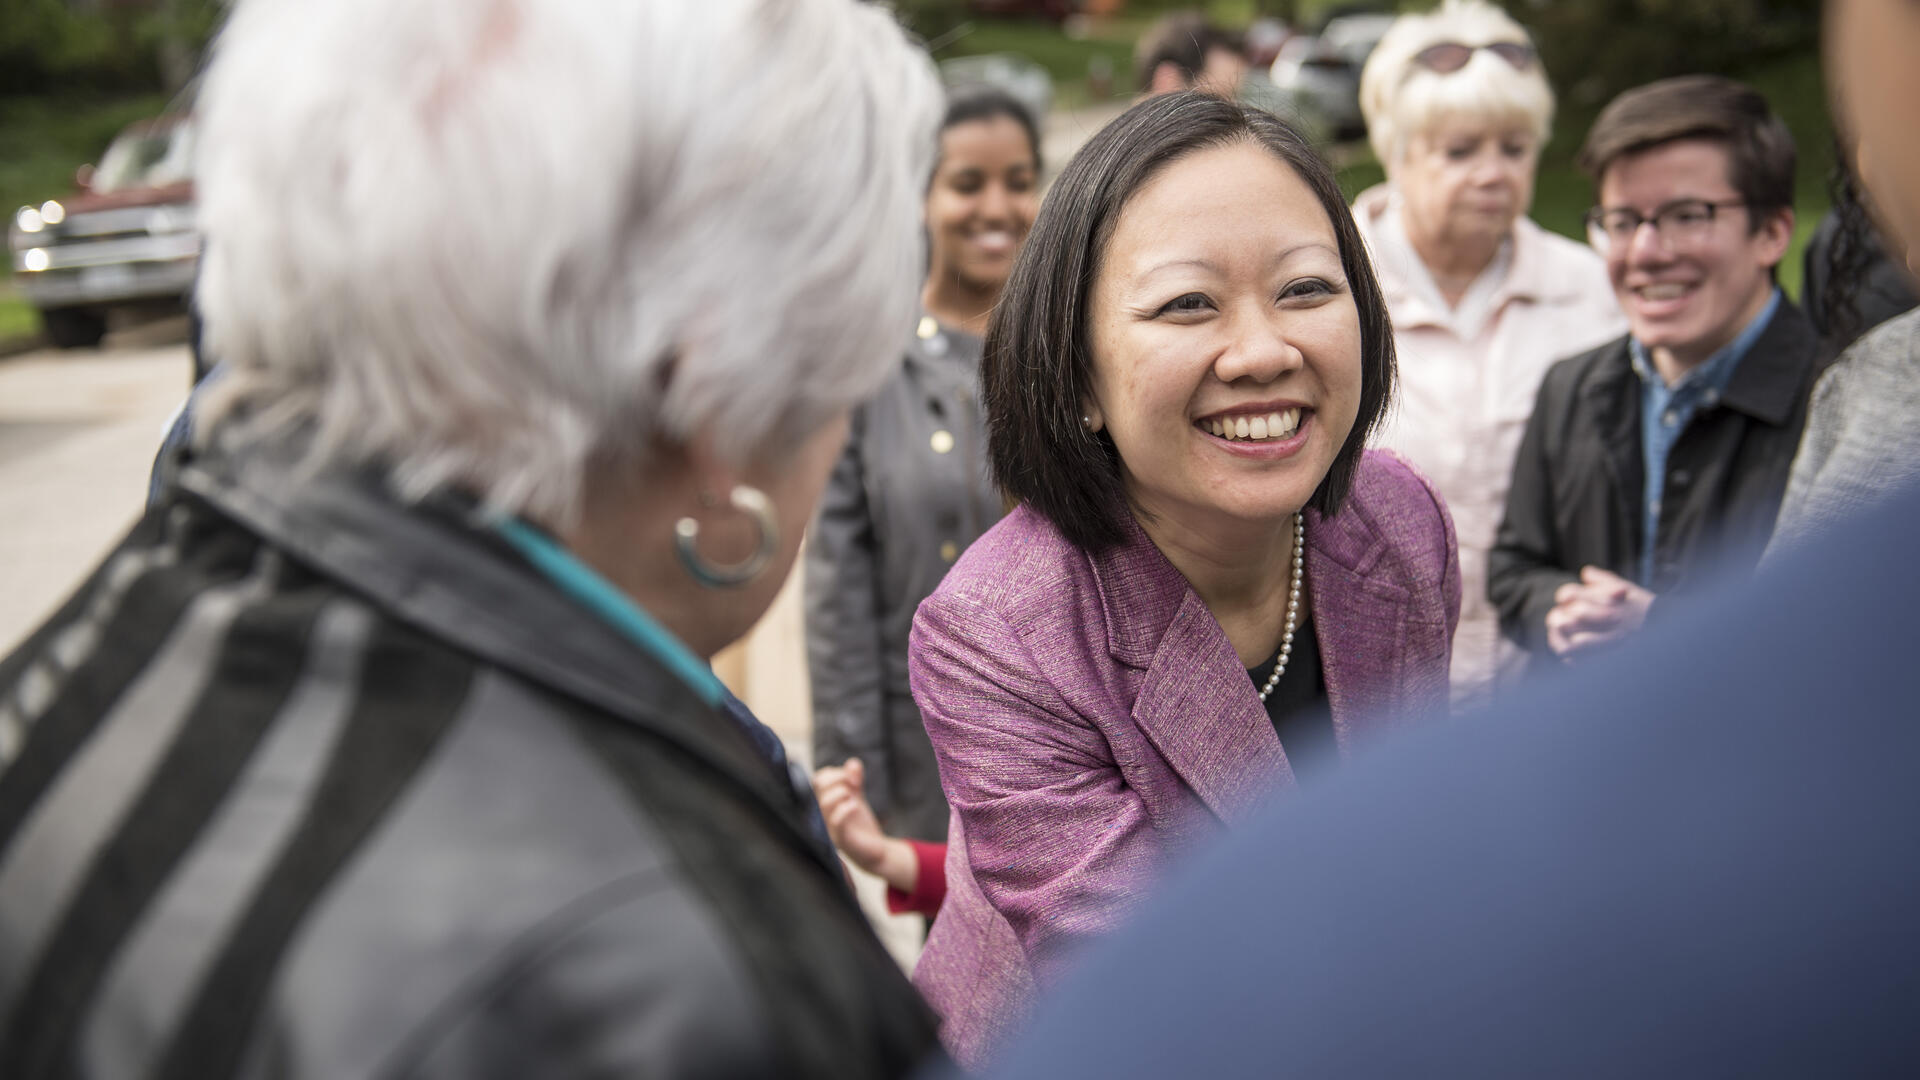 Kathy Tran shakes hands with voters while campaigning for a seat in the Virginia State House